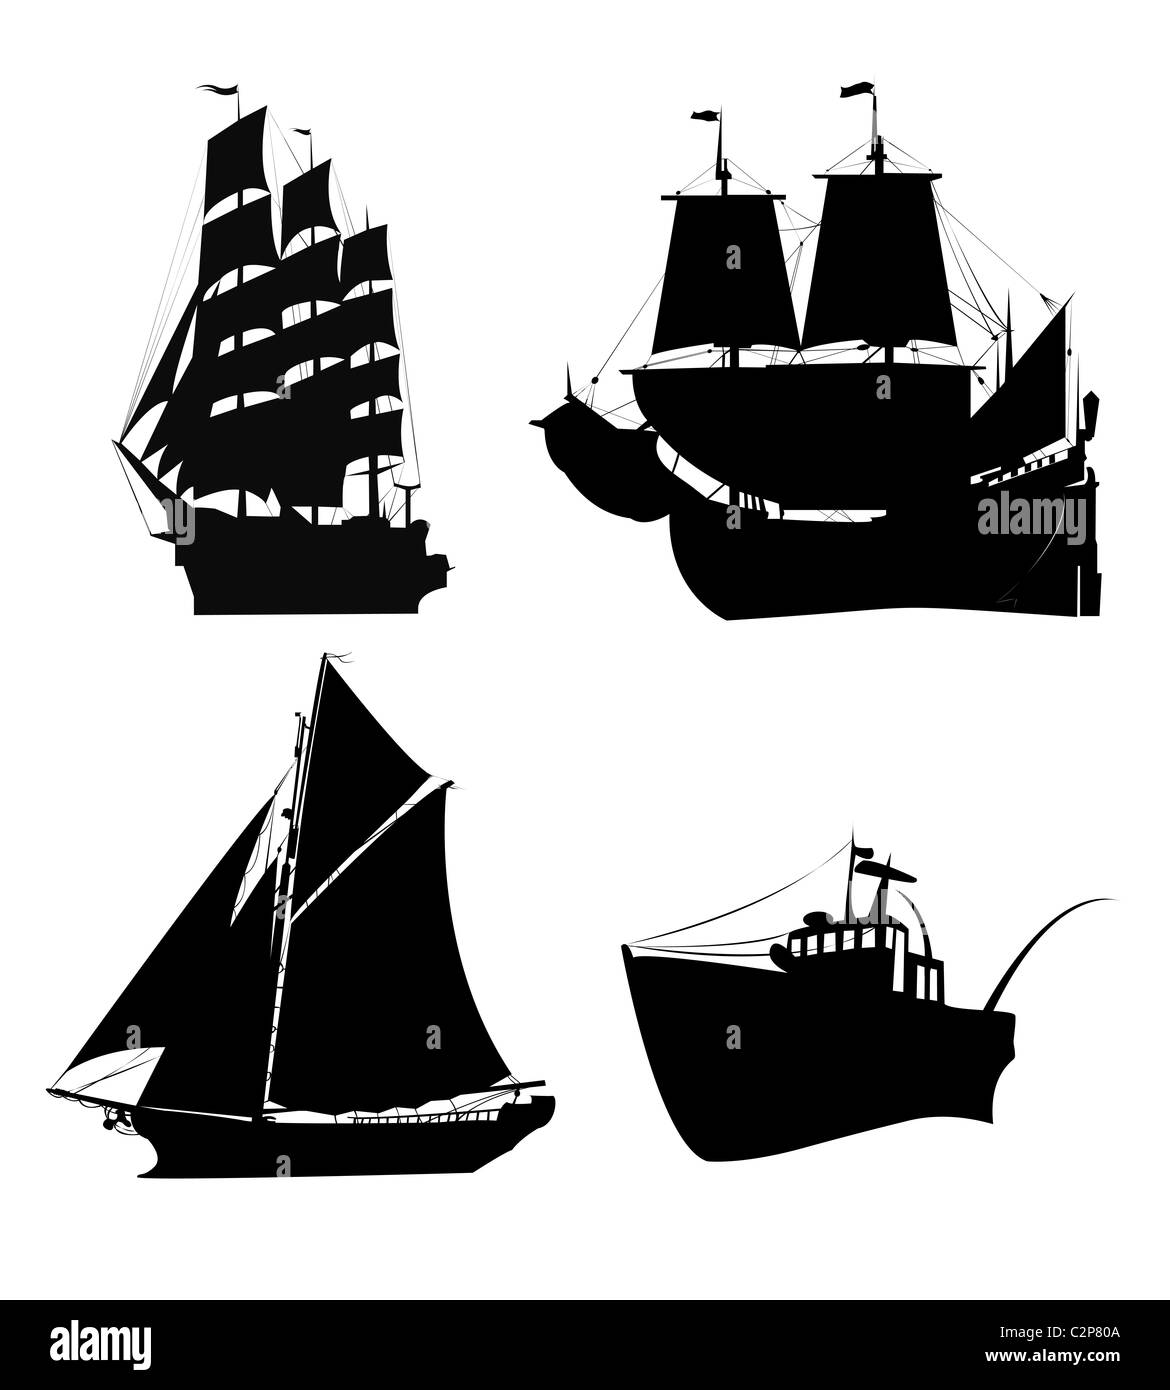 Ships silhouette Stock Photo